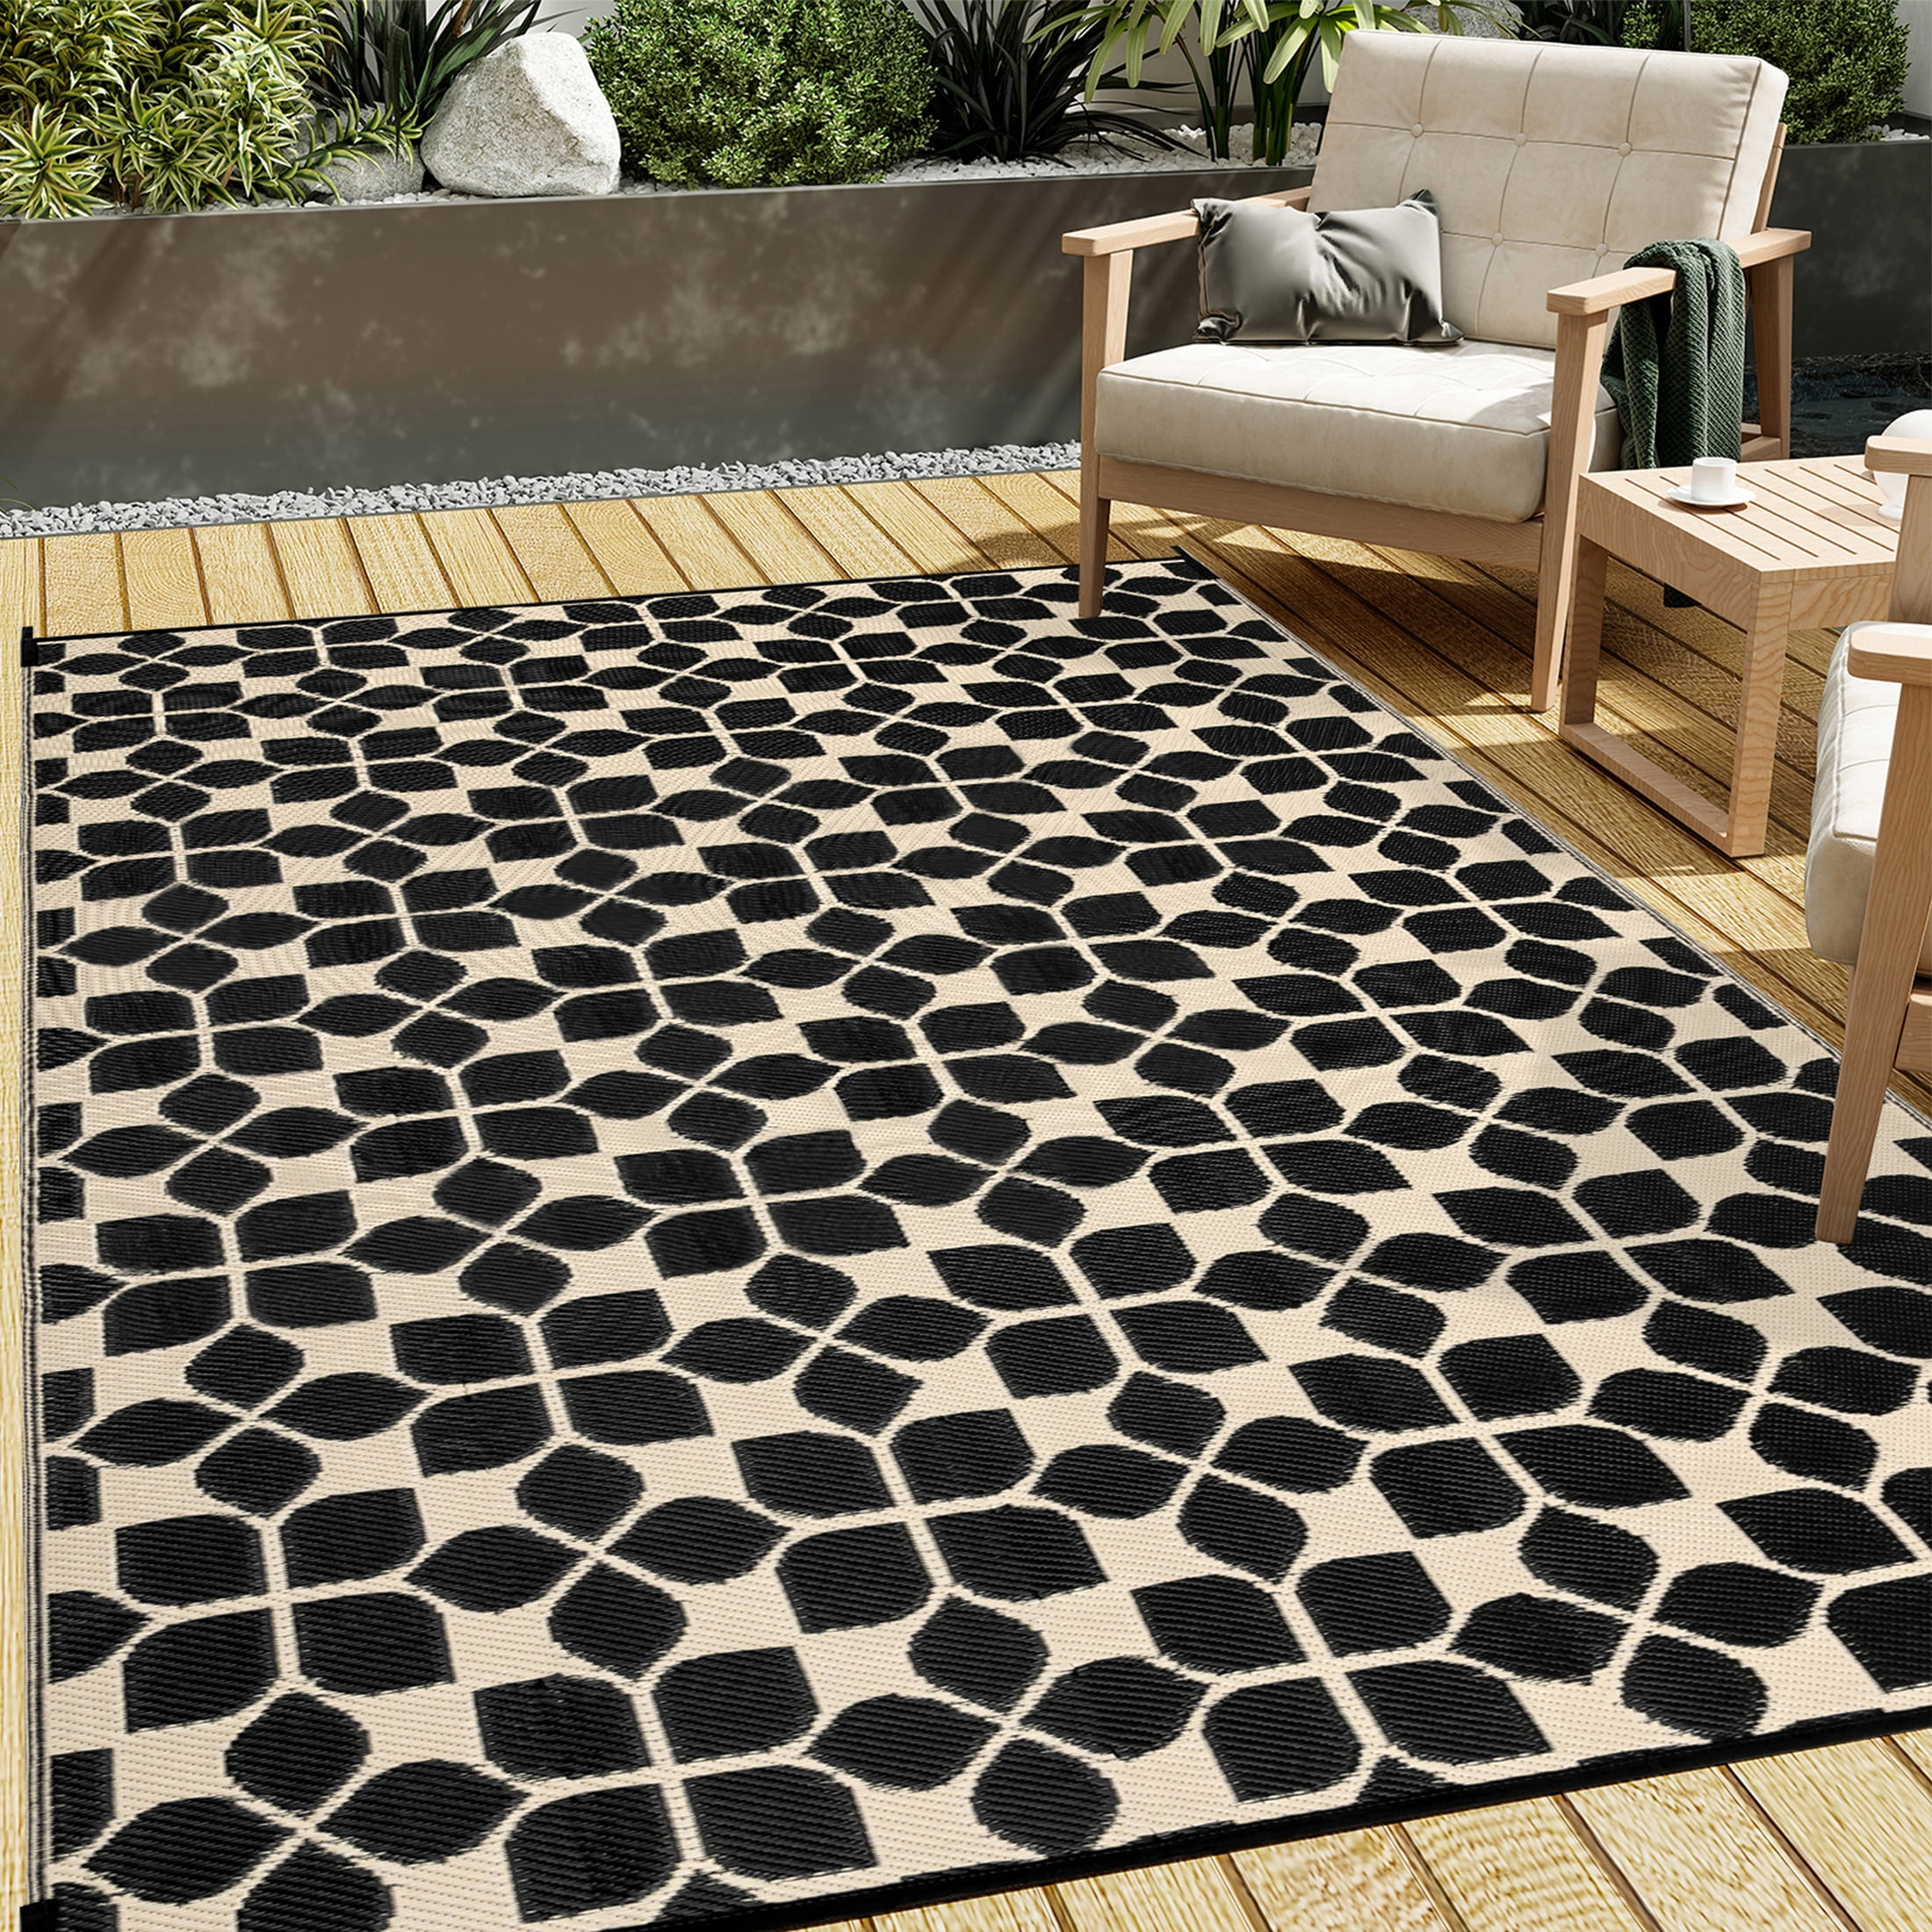 RURALITY Outdoor Rugs 5x8 Waterproof for Patios Clearance,Plastic Straw  Mats for Backyard,Porch,Deck,Balcony,Reversible,2-Frame Pattern